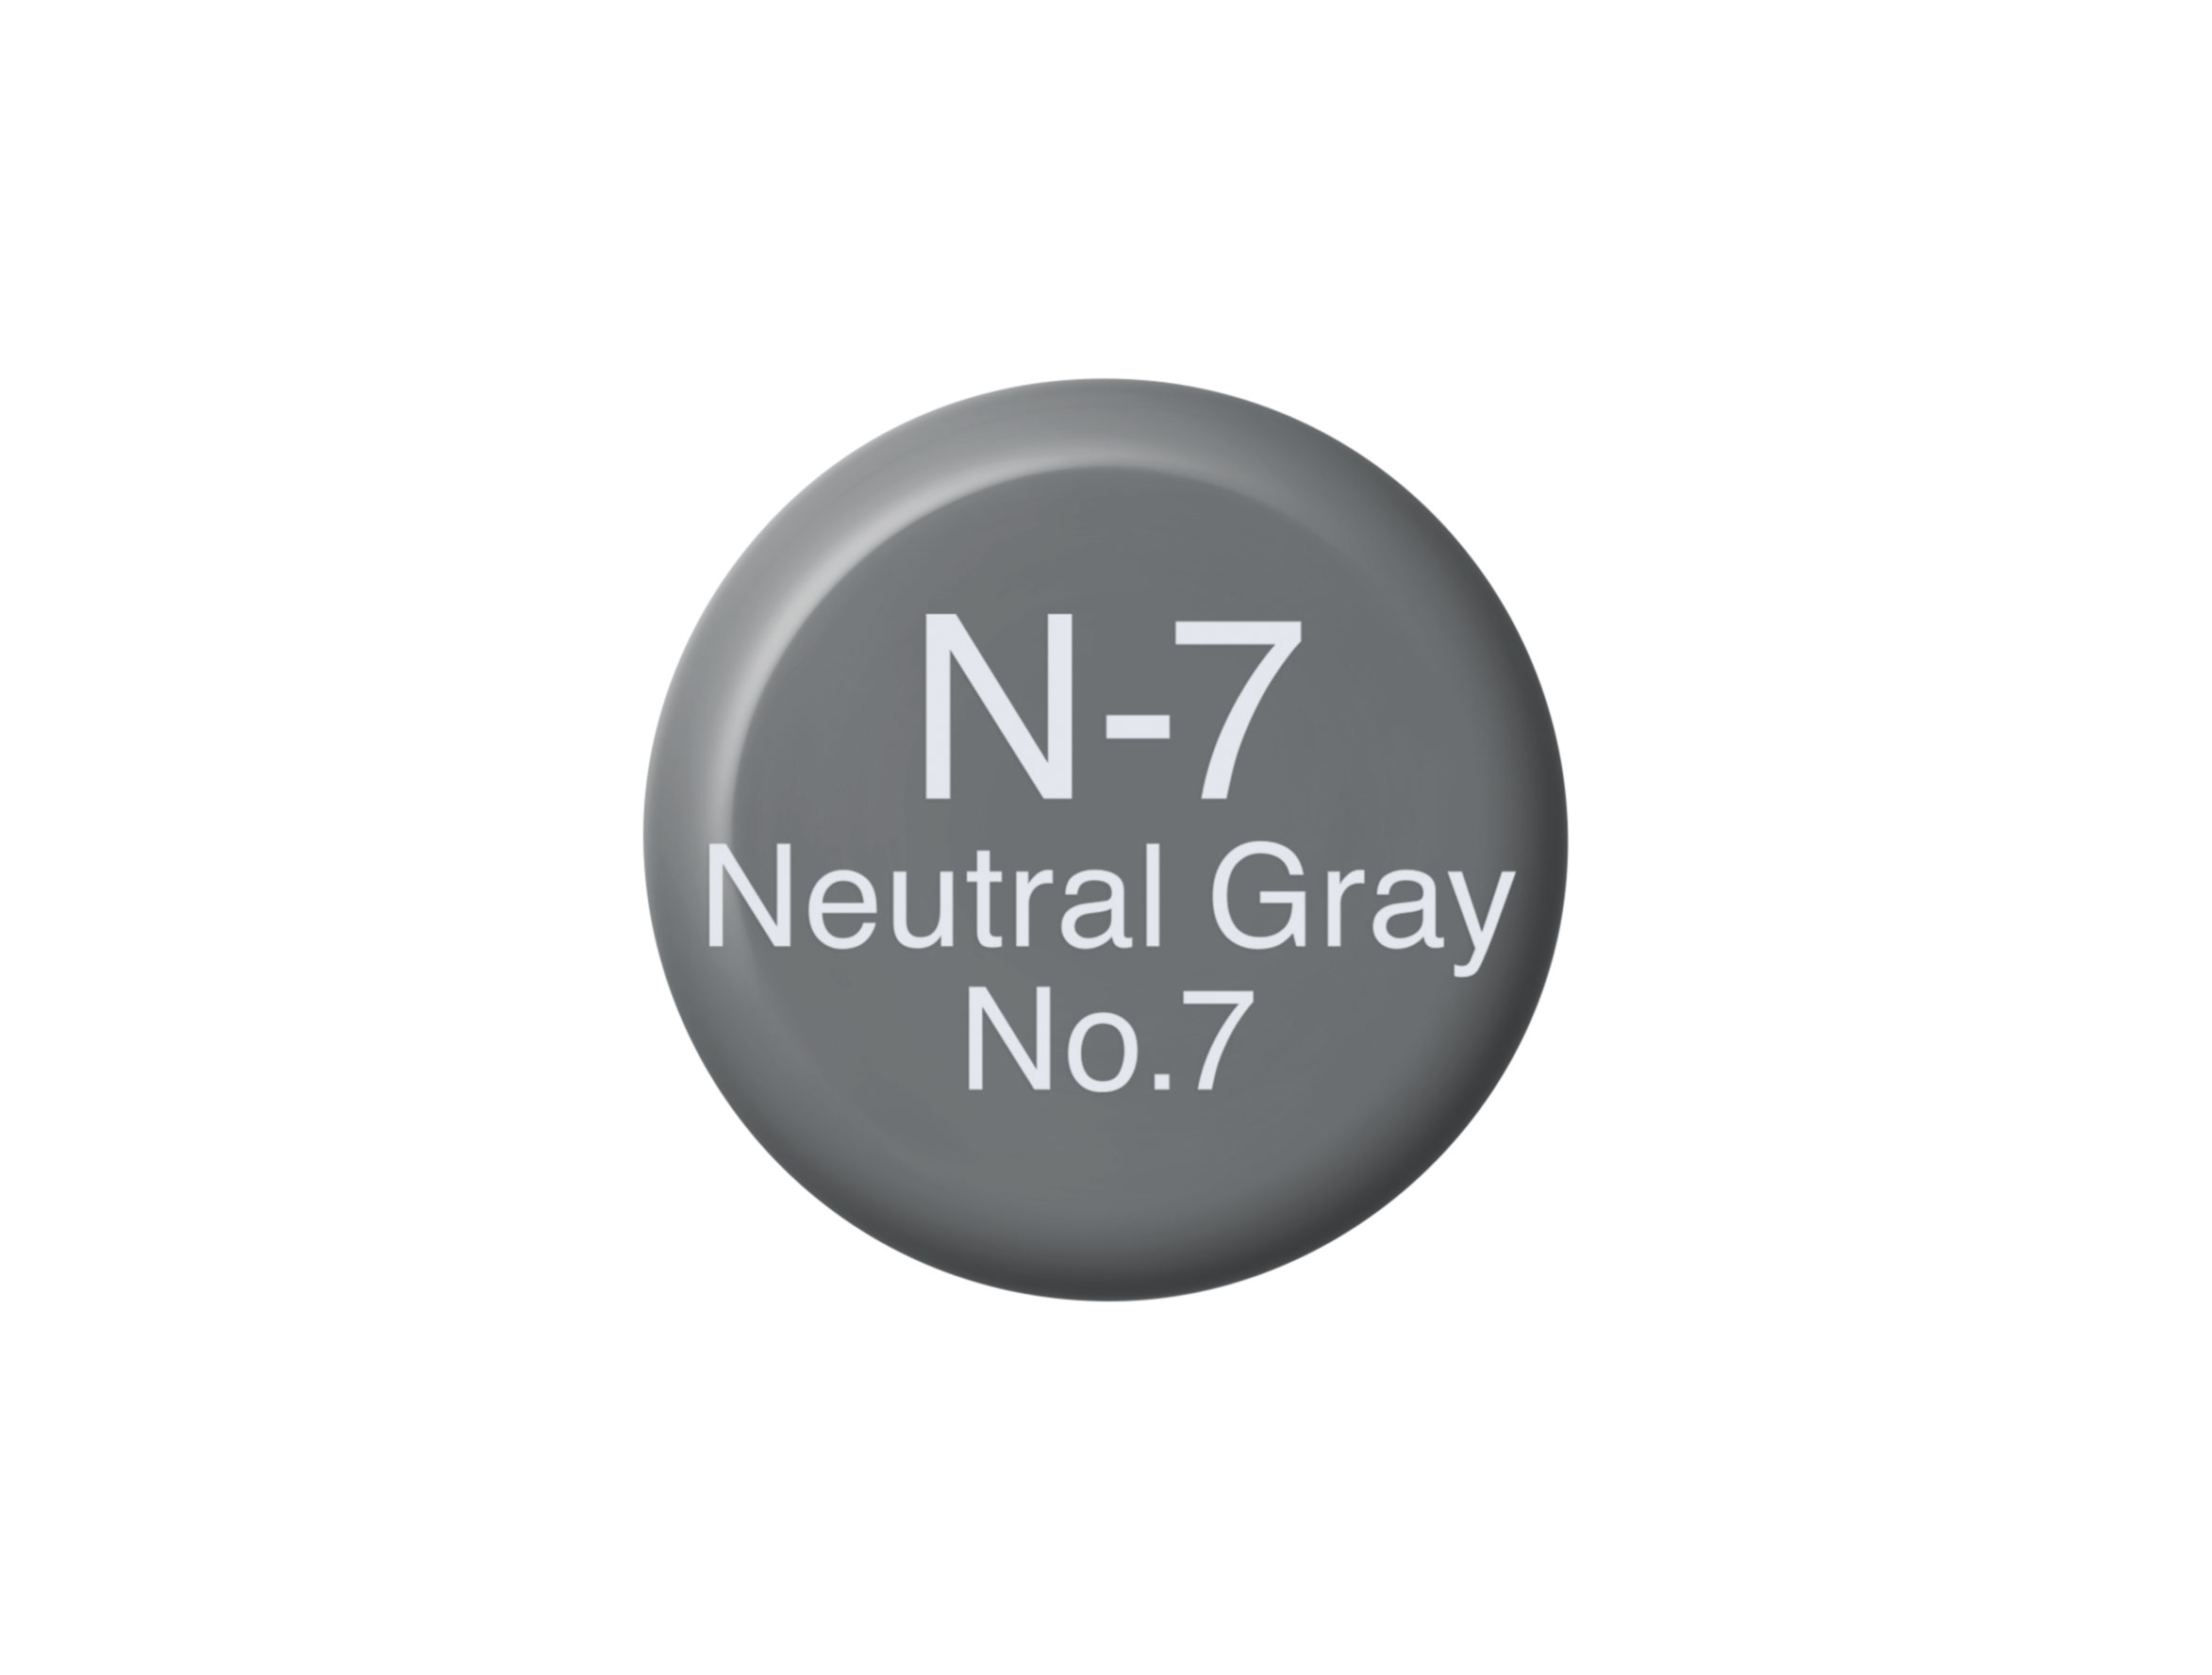 Copic Ink N7 Neutral Gray No.7